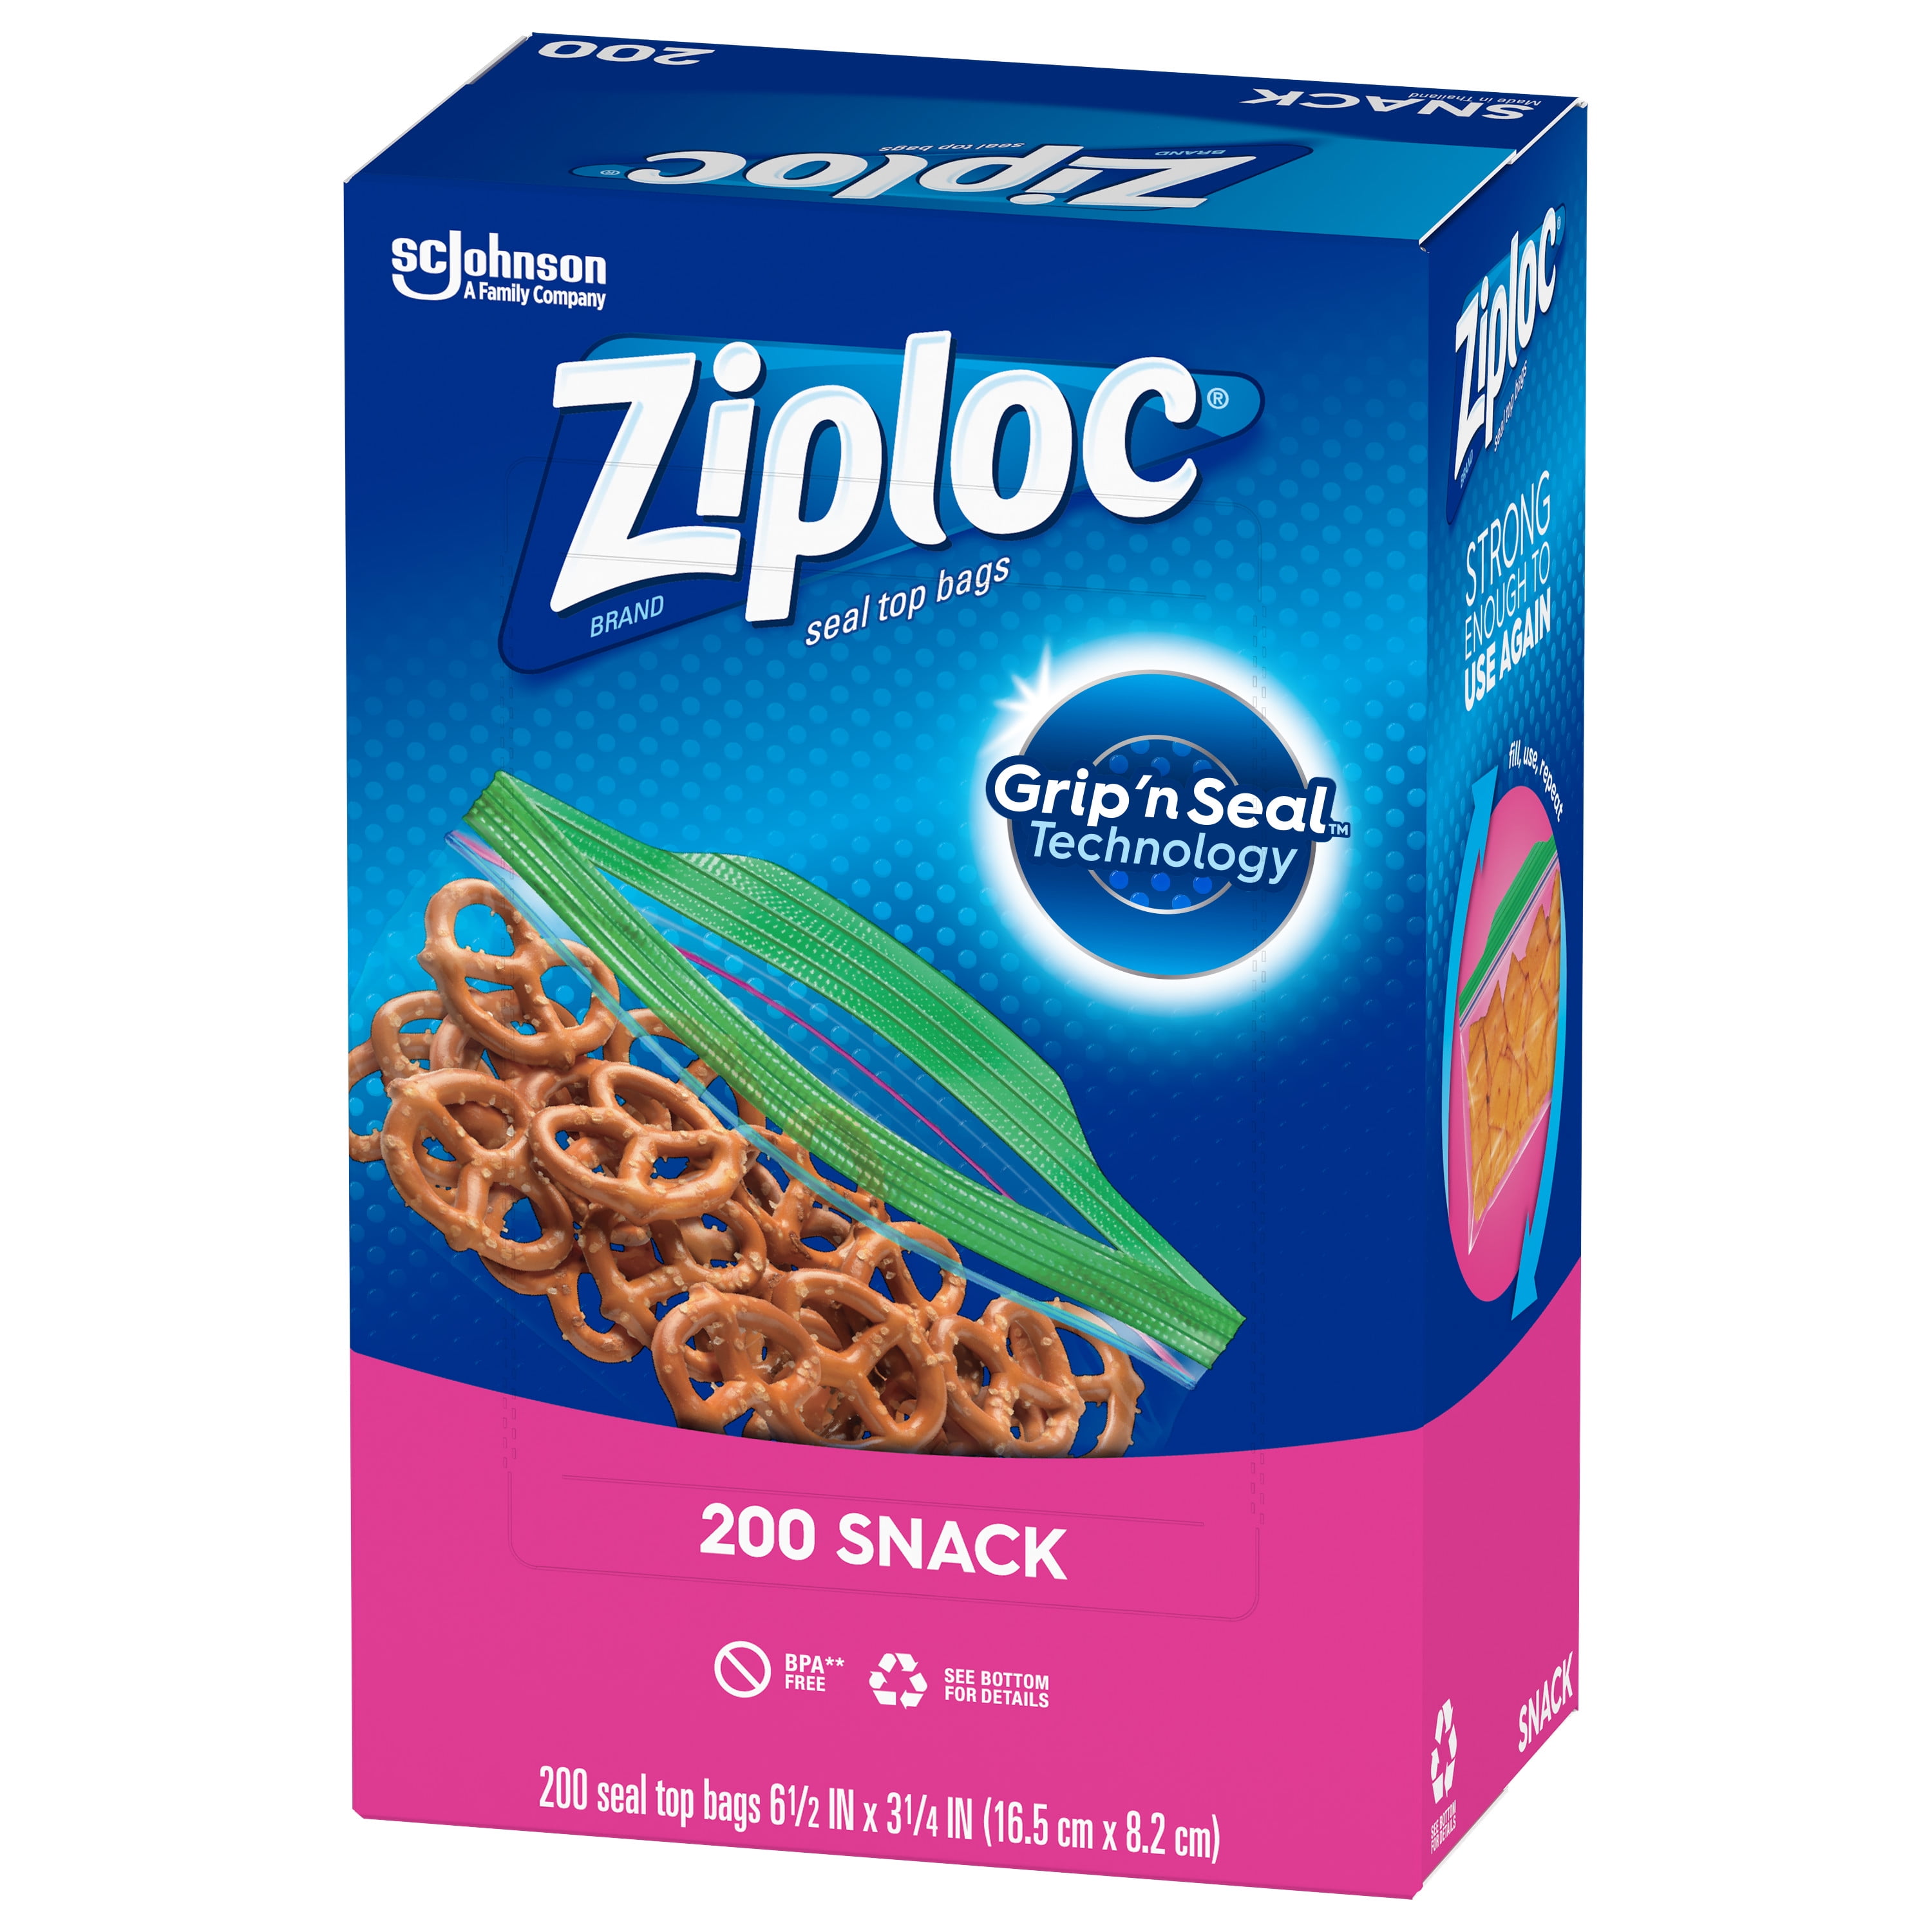 Ziploc Snack Bag and Sandwich Bag Mixed Pack, 495 pk. - Clear